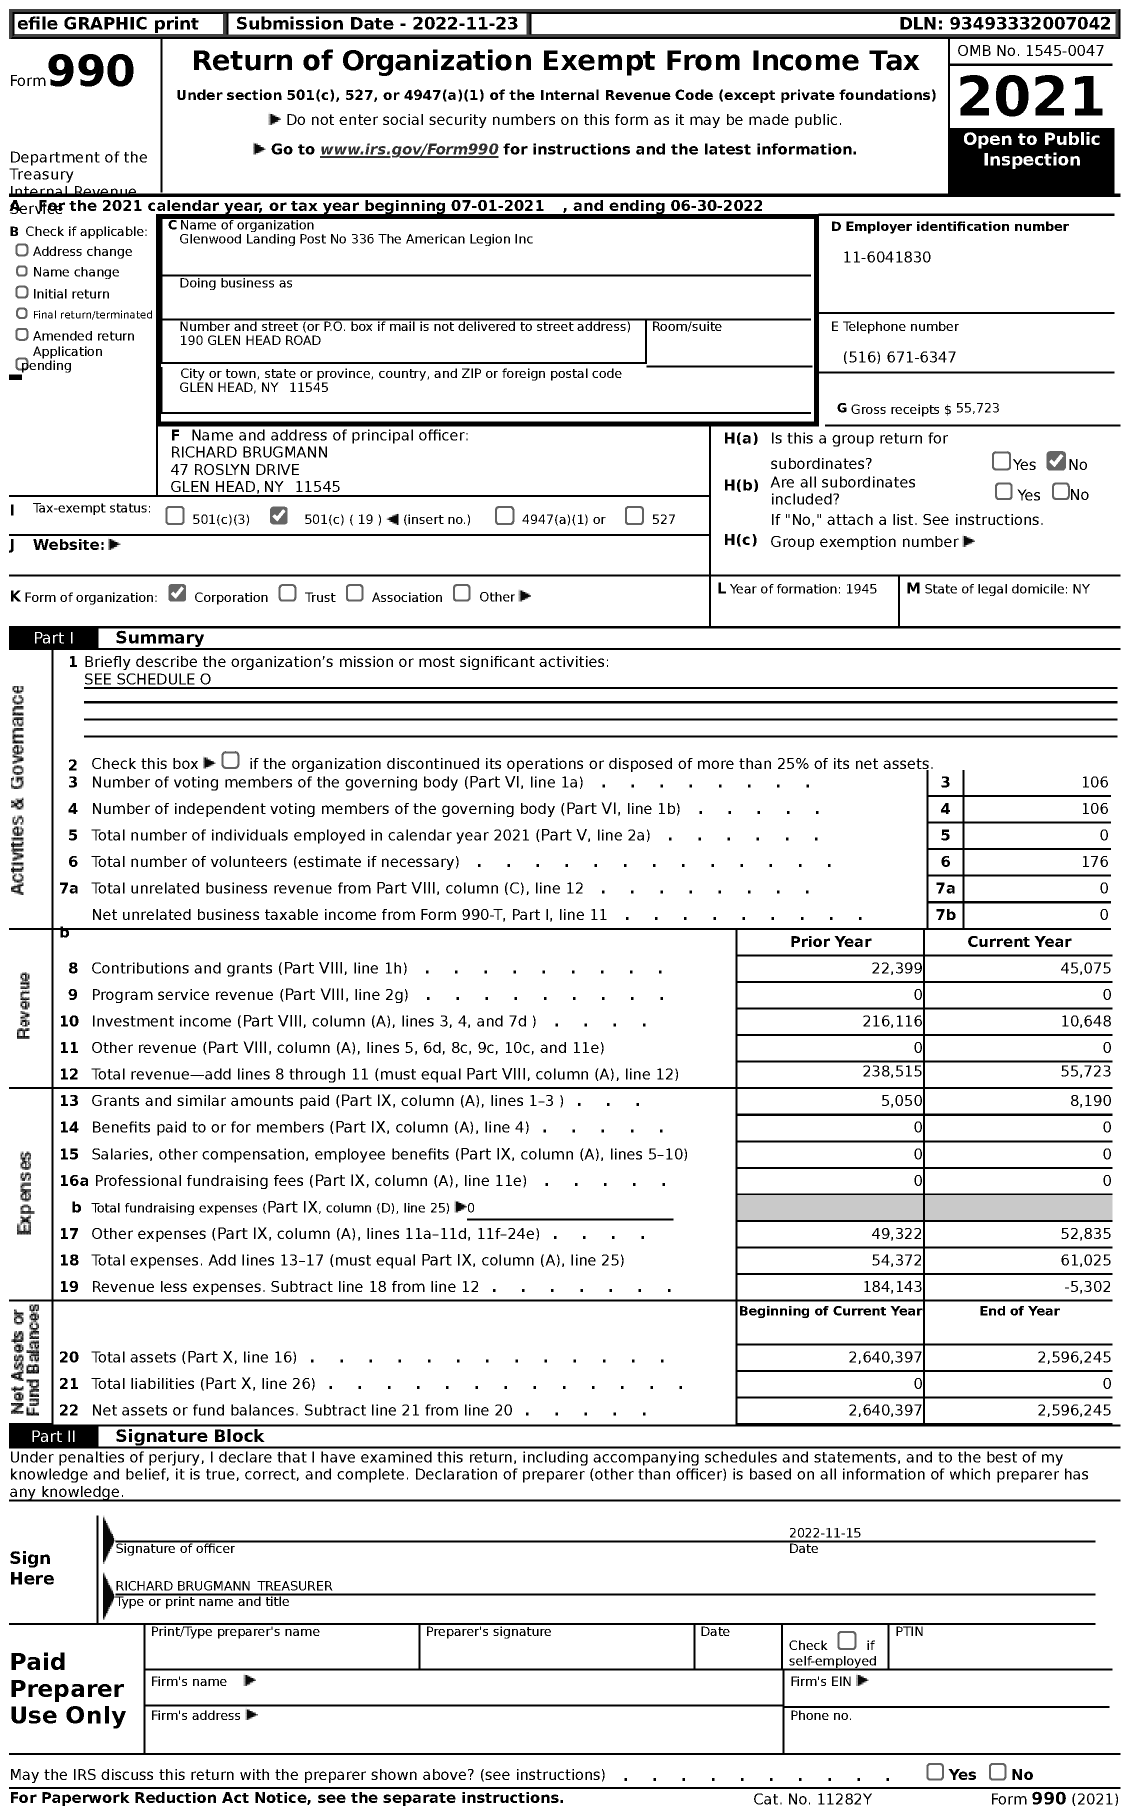 Image of first page of 2021 Form 990 for Glenwood Landing Post No336 The American Legion